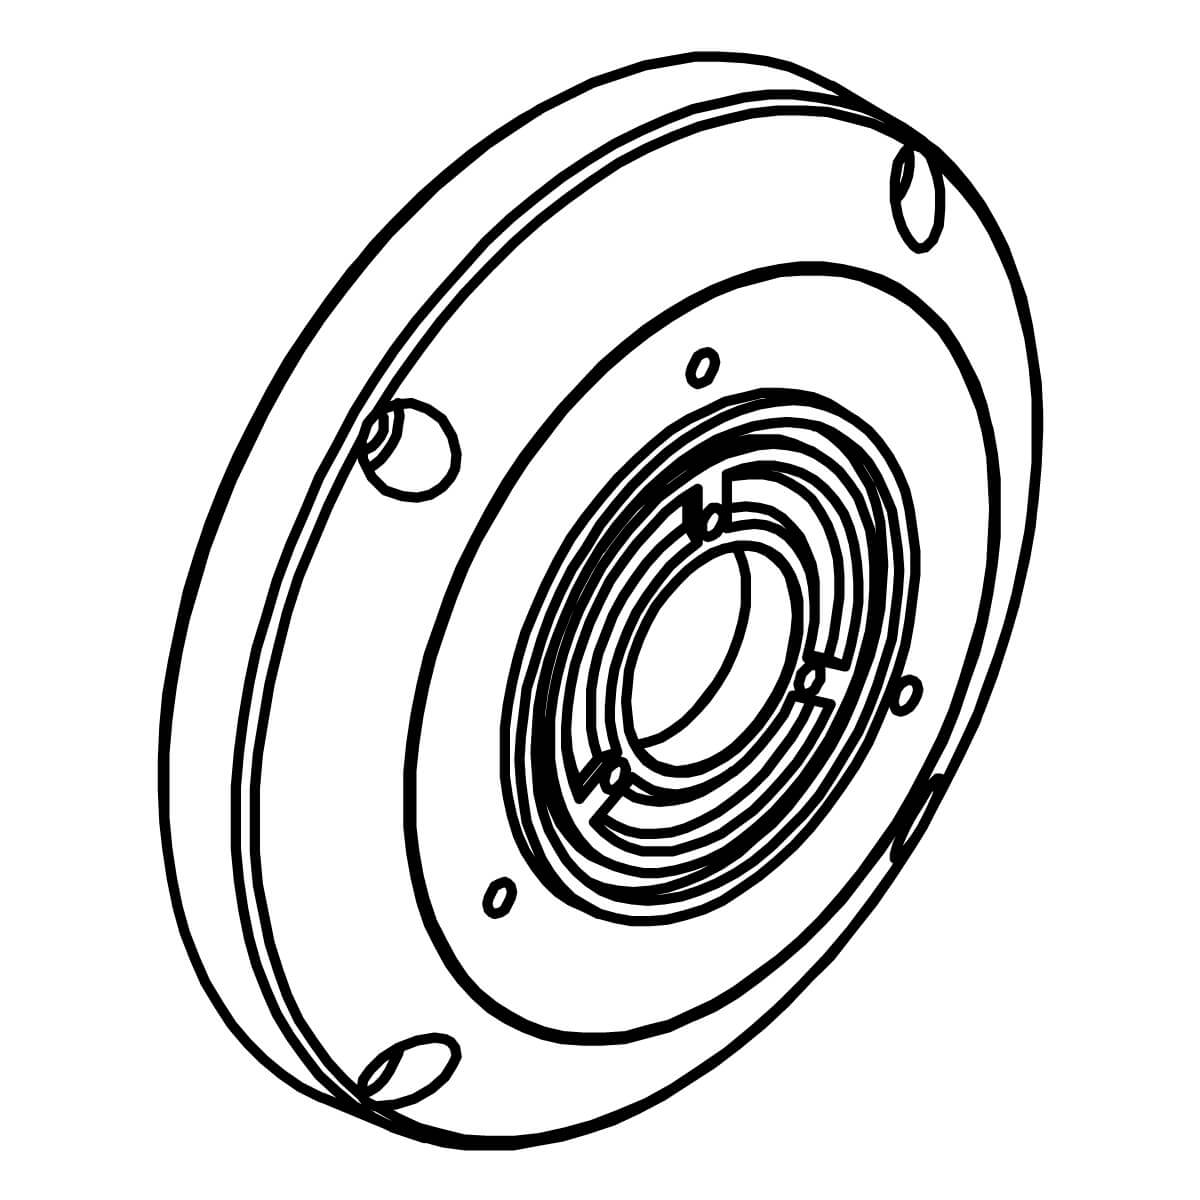 09302 - Santos #9 - front flange only (before 2009)